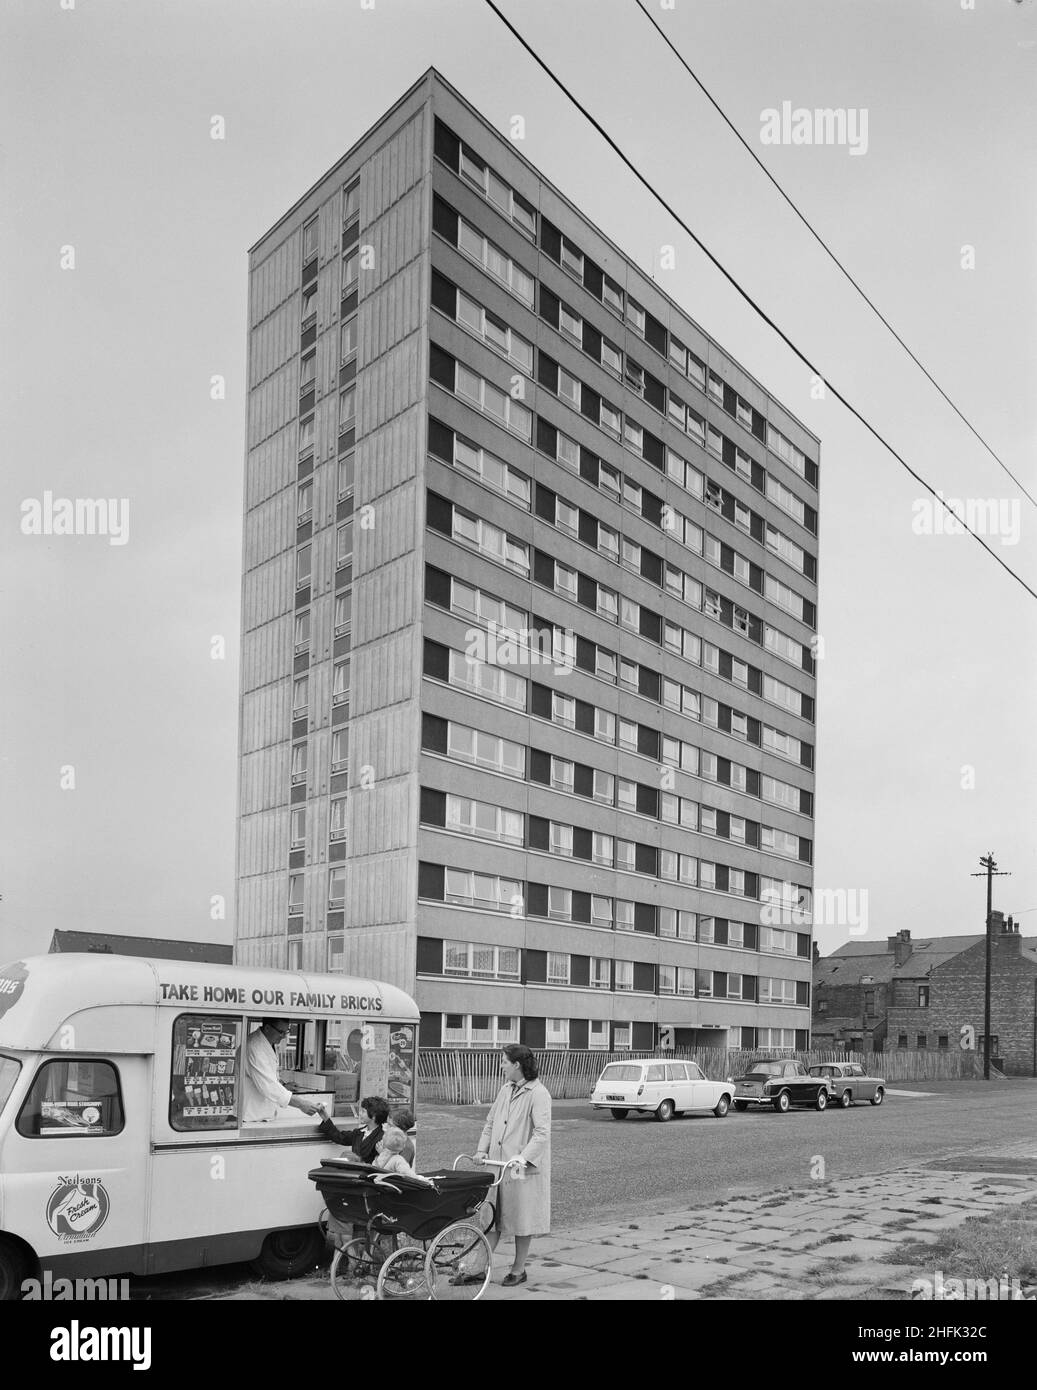 Hornchurch Court, Bonsall Street, Hulme, Manchester, 12/08/1965. A recently completed multi-storey block of 'Sectra' flats in Hulme, probably Hornchurch Court, with a family in the foreground buying from an ice cream van. 'Sectra&#x2019; was a French prefabricated steel formwork design for flats which John Laing and Son Ltd acquired the British rights to in 1962. It was a method of using precision made steel formwork for the placing of structural concrete in 'tunnel' sections in room unit widths and ceiling heights. The units were bolted together in rows on special tracks, with the concrete po Stock Photo